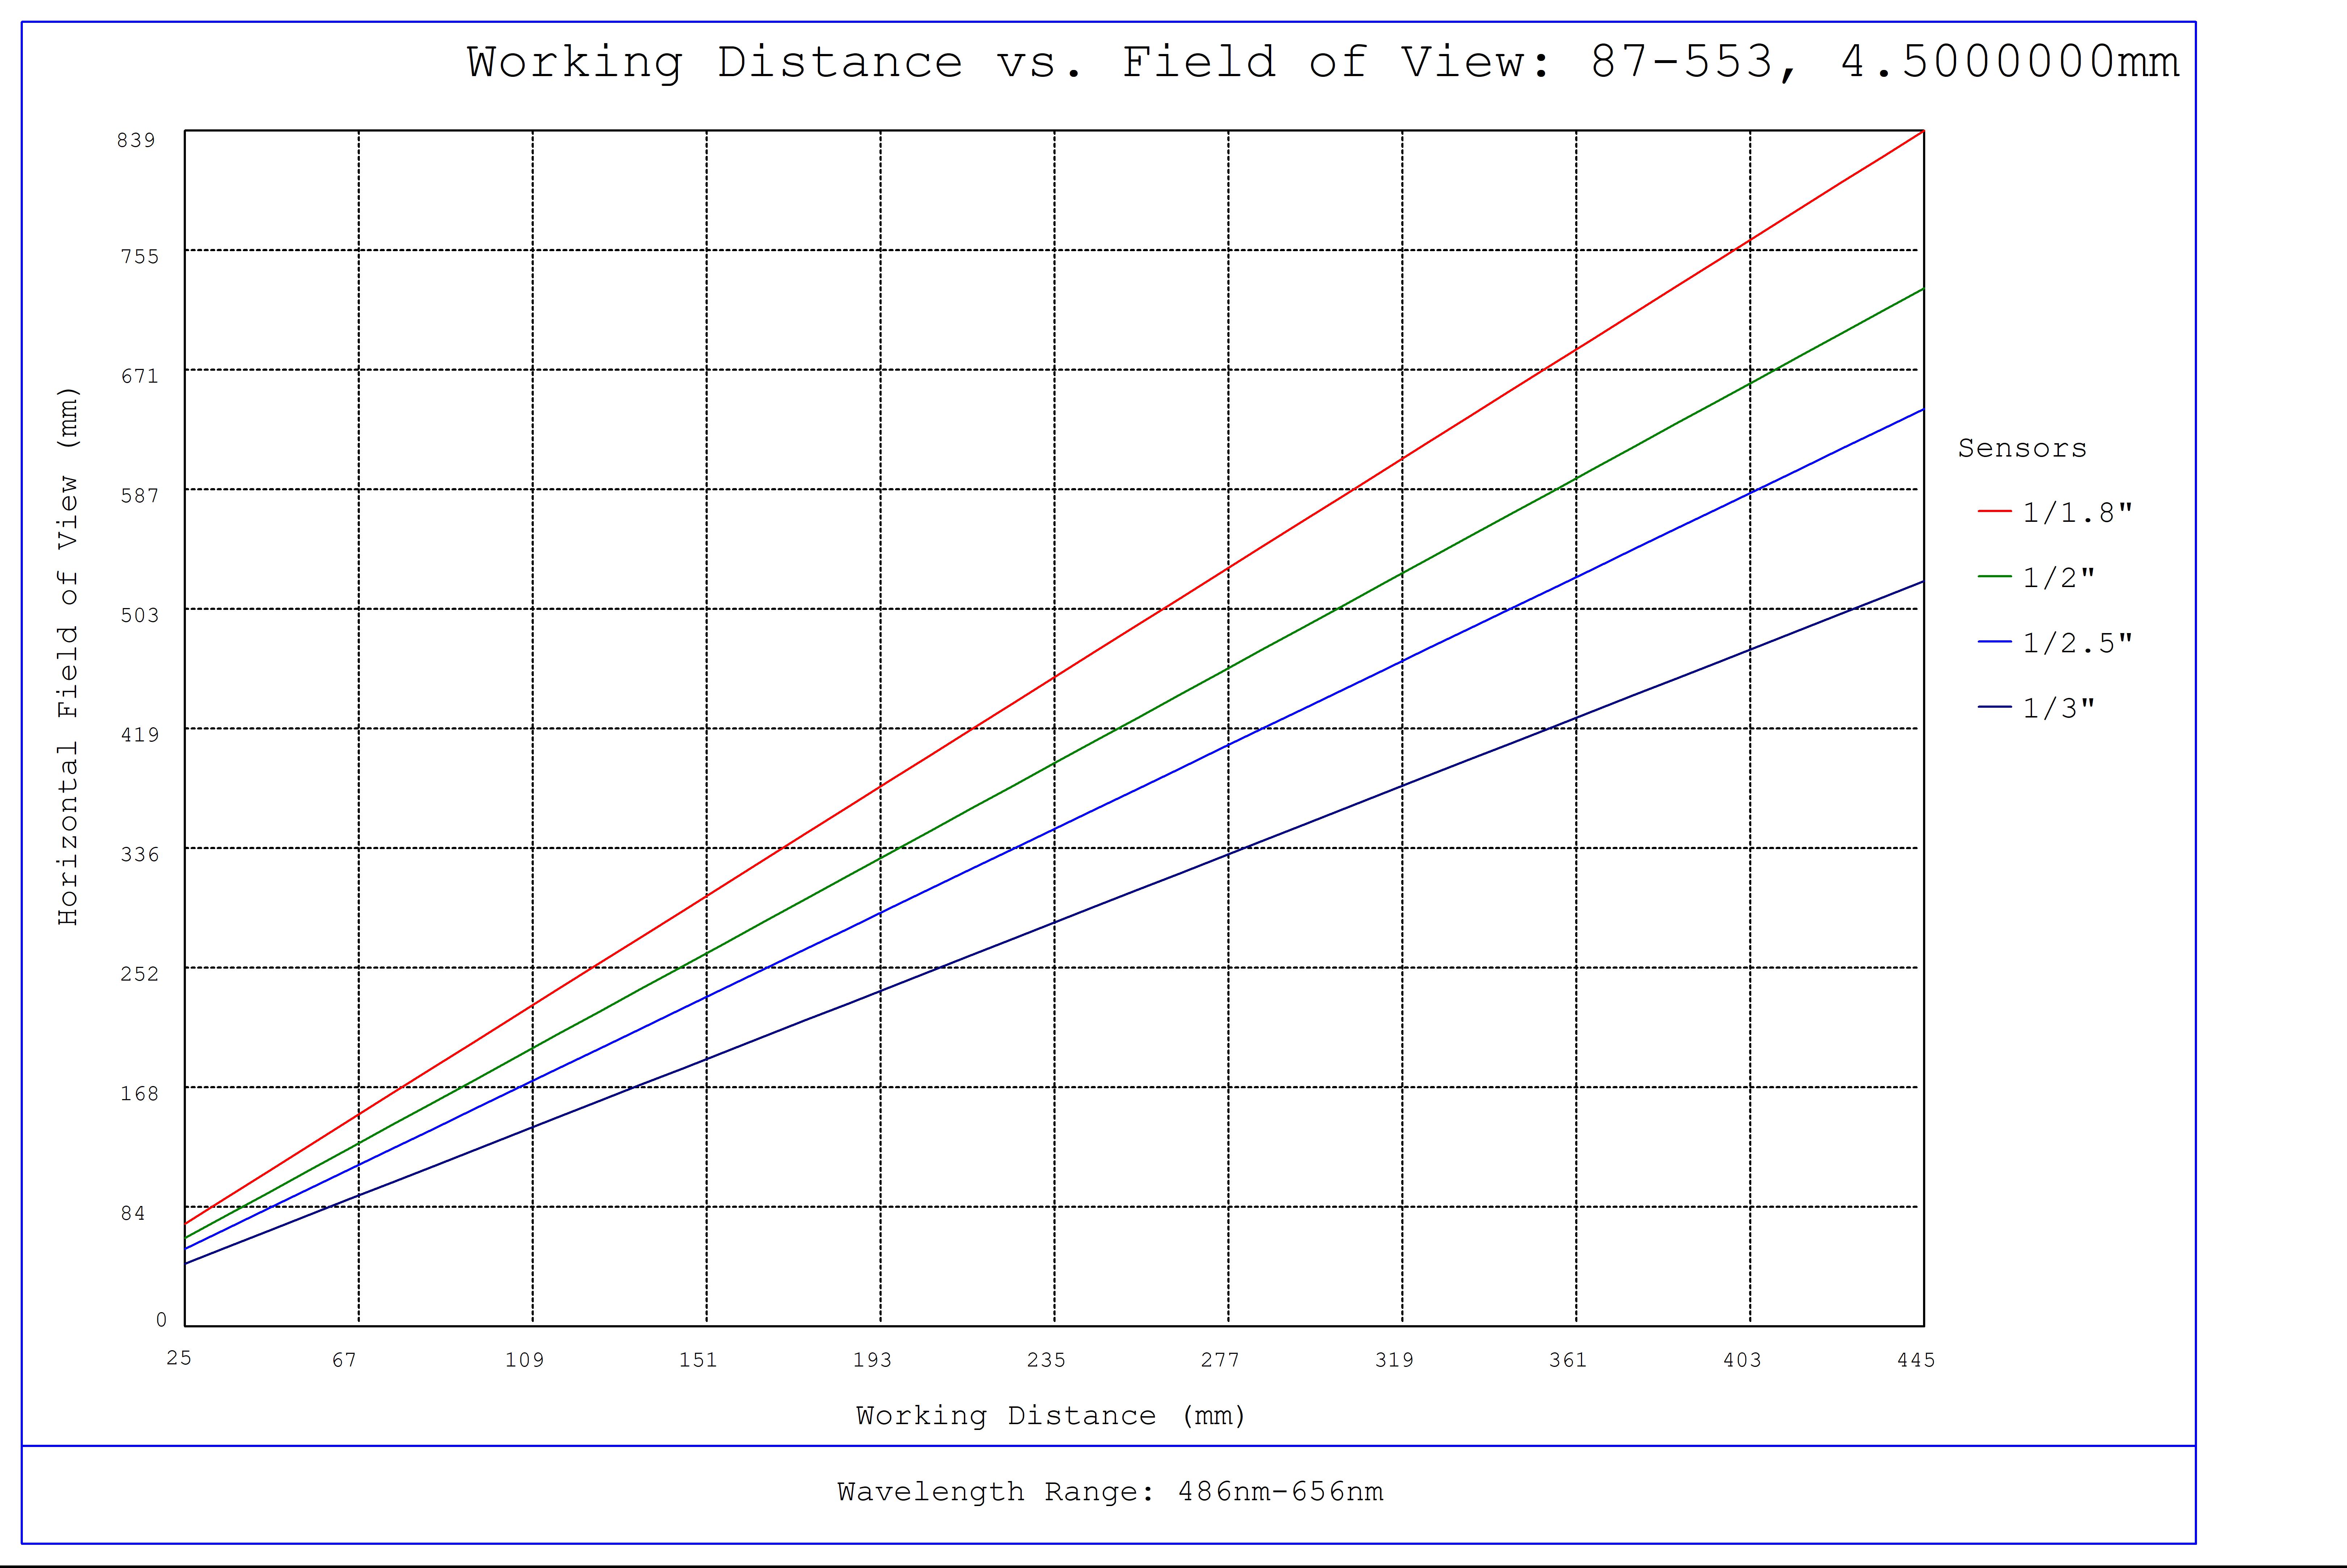 #87-553, 4.5mm, f/4 Ci Series Fixed Focal Length Lens, Working Distance versus Field of View Plot